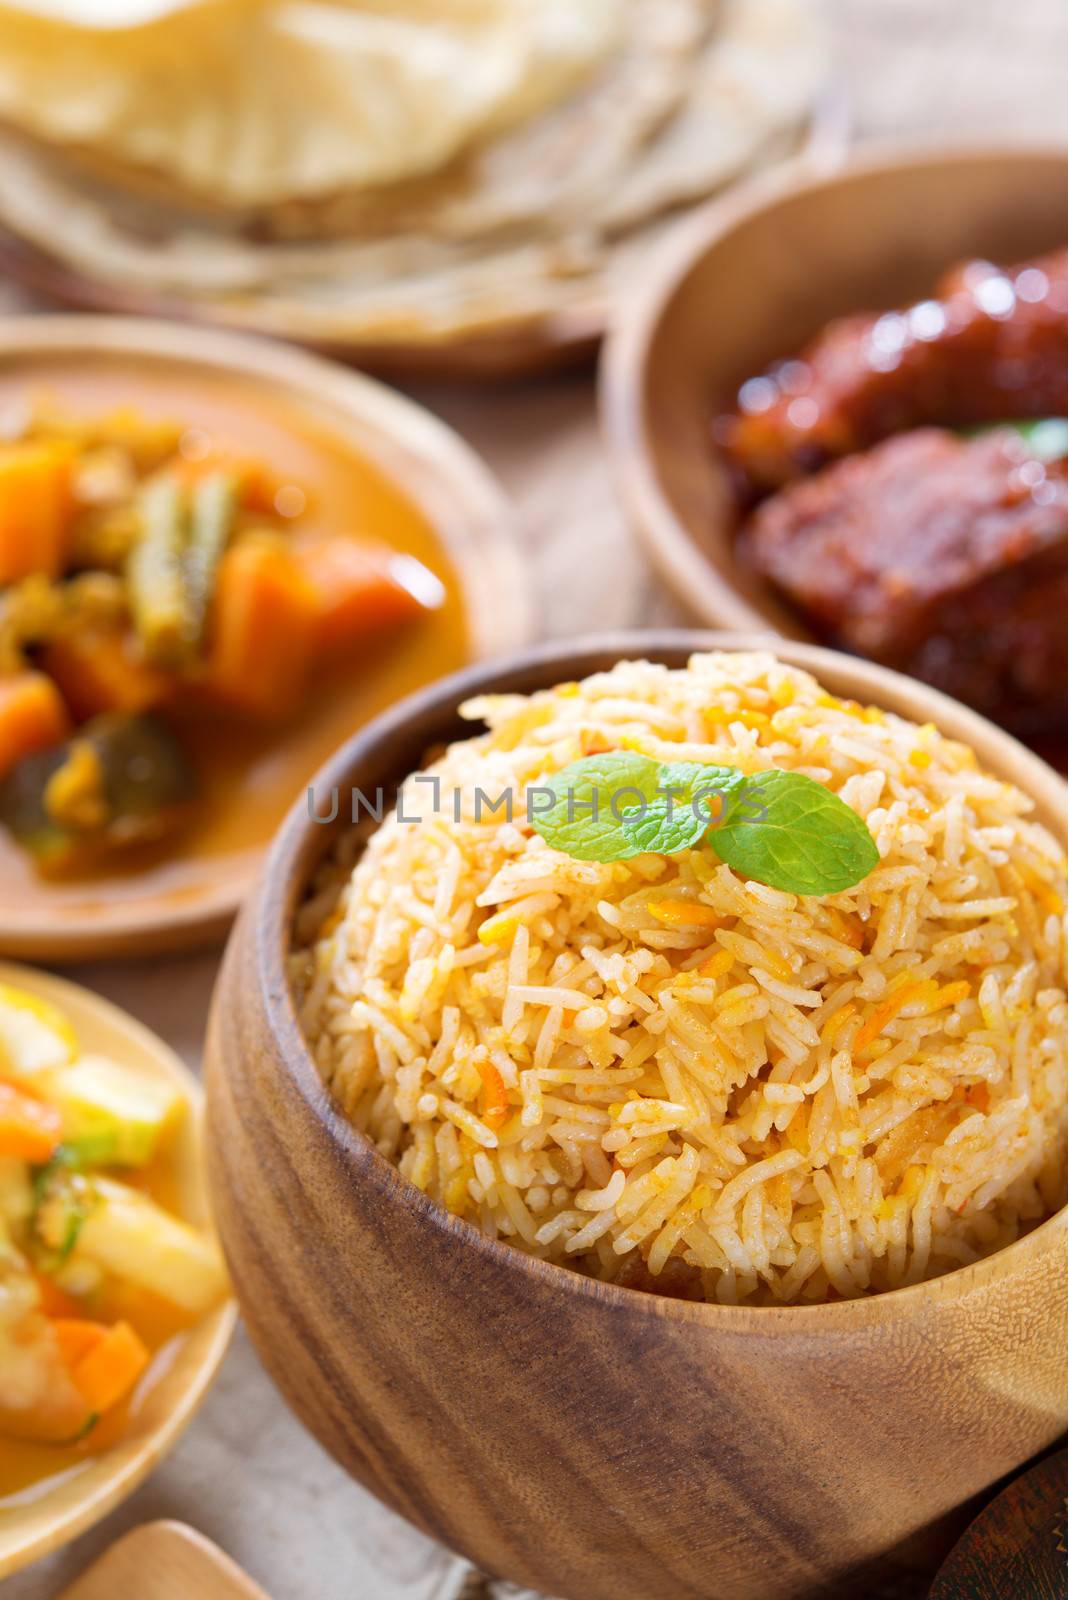 Biryani rice or pilaf rice with curry, fresh cooked basmati rice with spices, delicious Indian food.